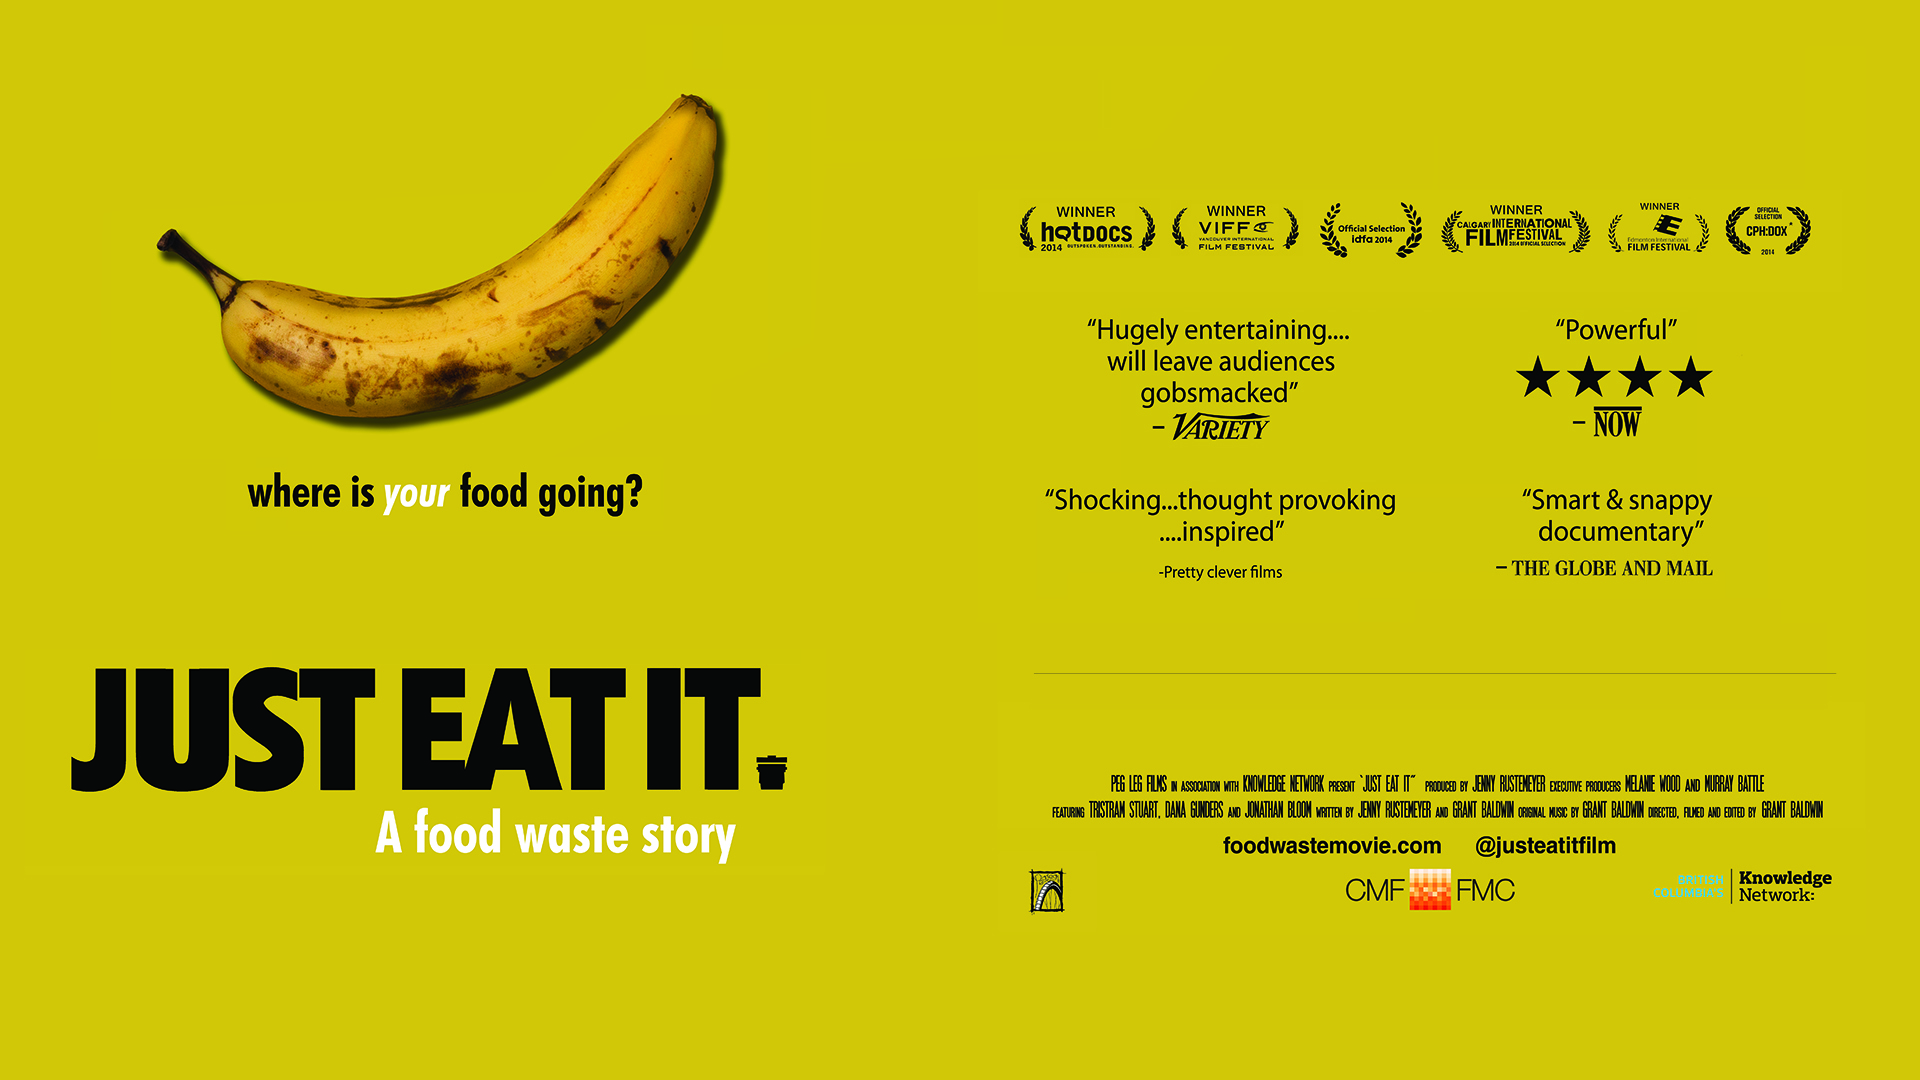 just-eat-it-a-food-waste-story-film-screening-uvm-bored